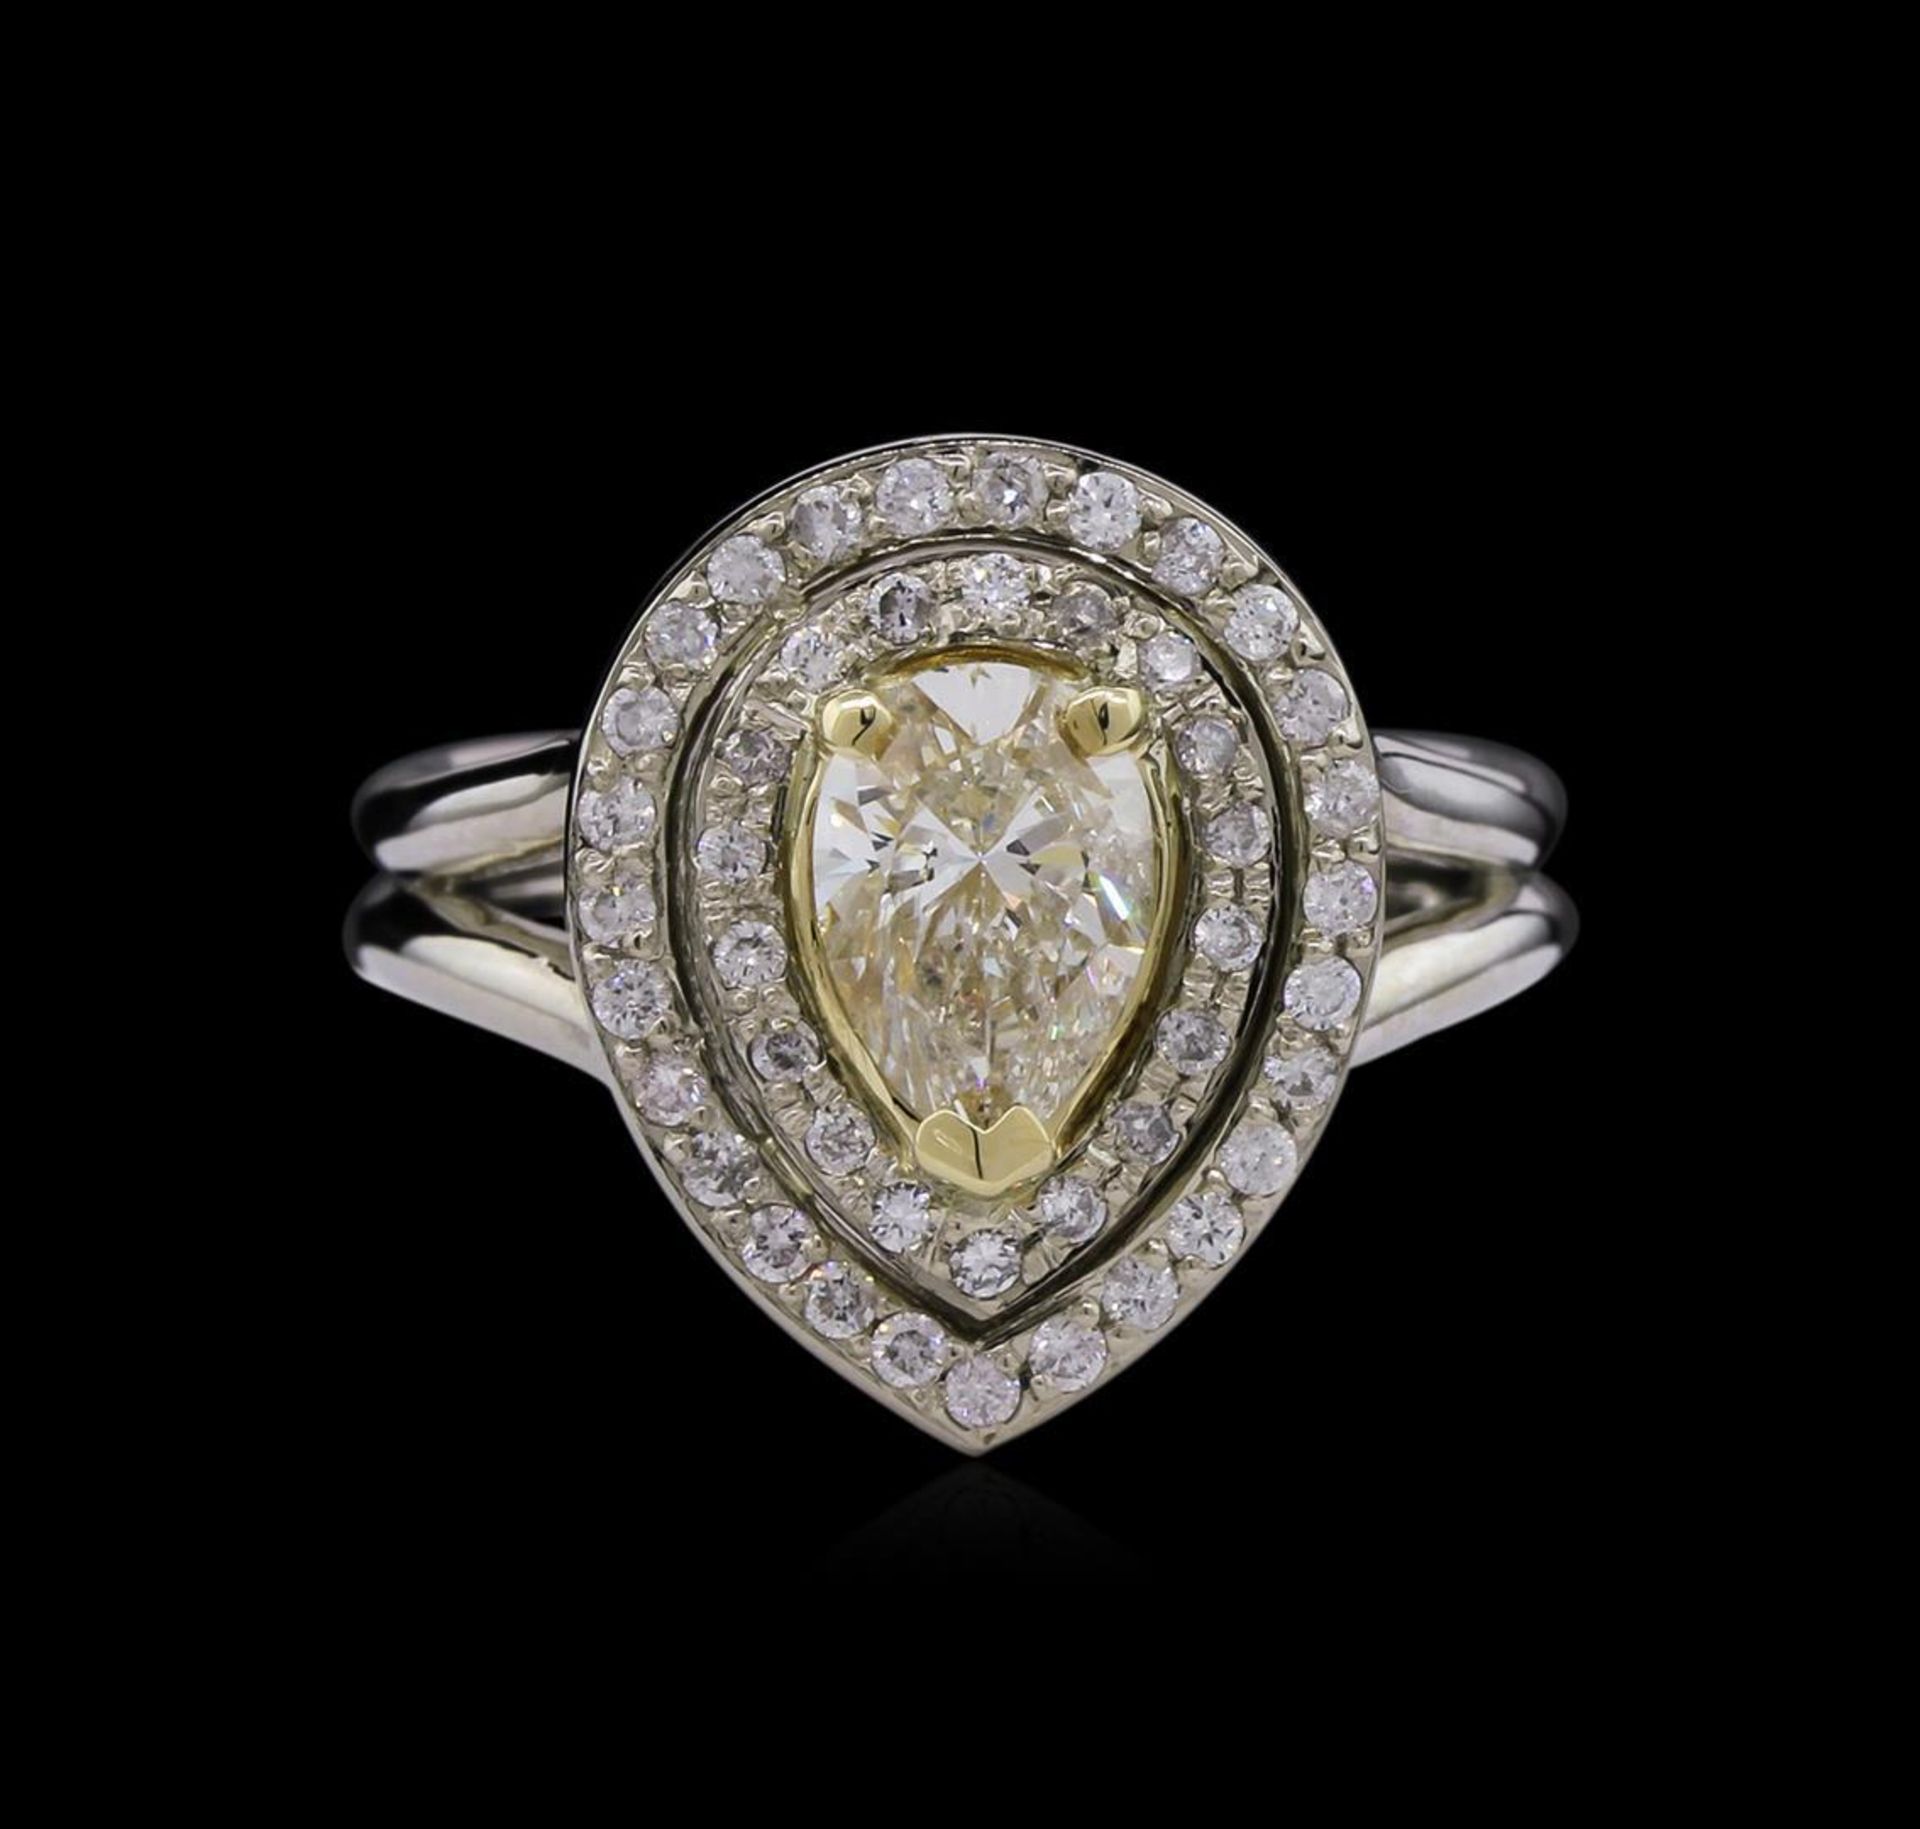 1.50 ctw Light Yellow Diamond Ring - 14KT Two-Tone Gold - Image 2 of 3